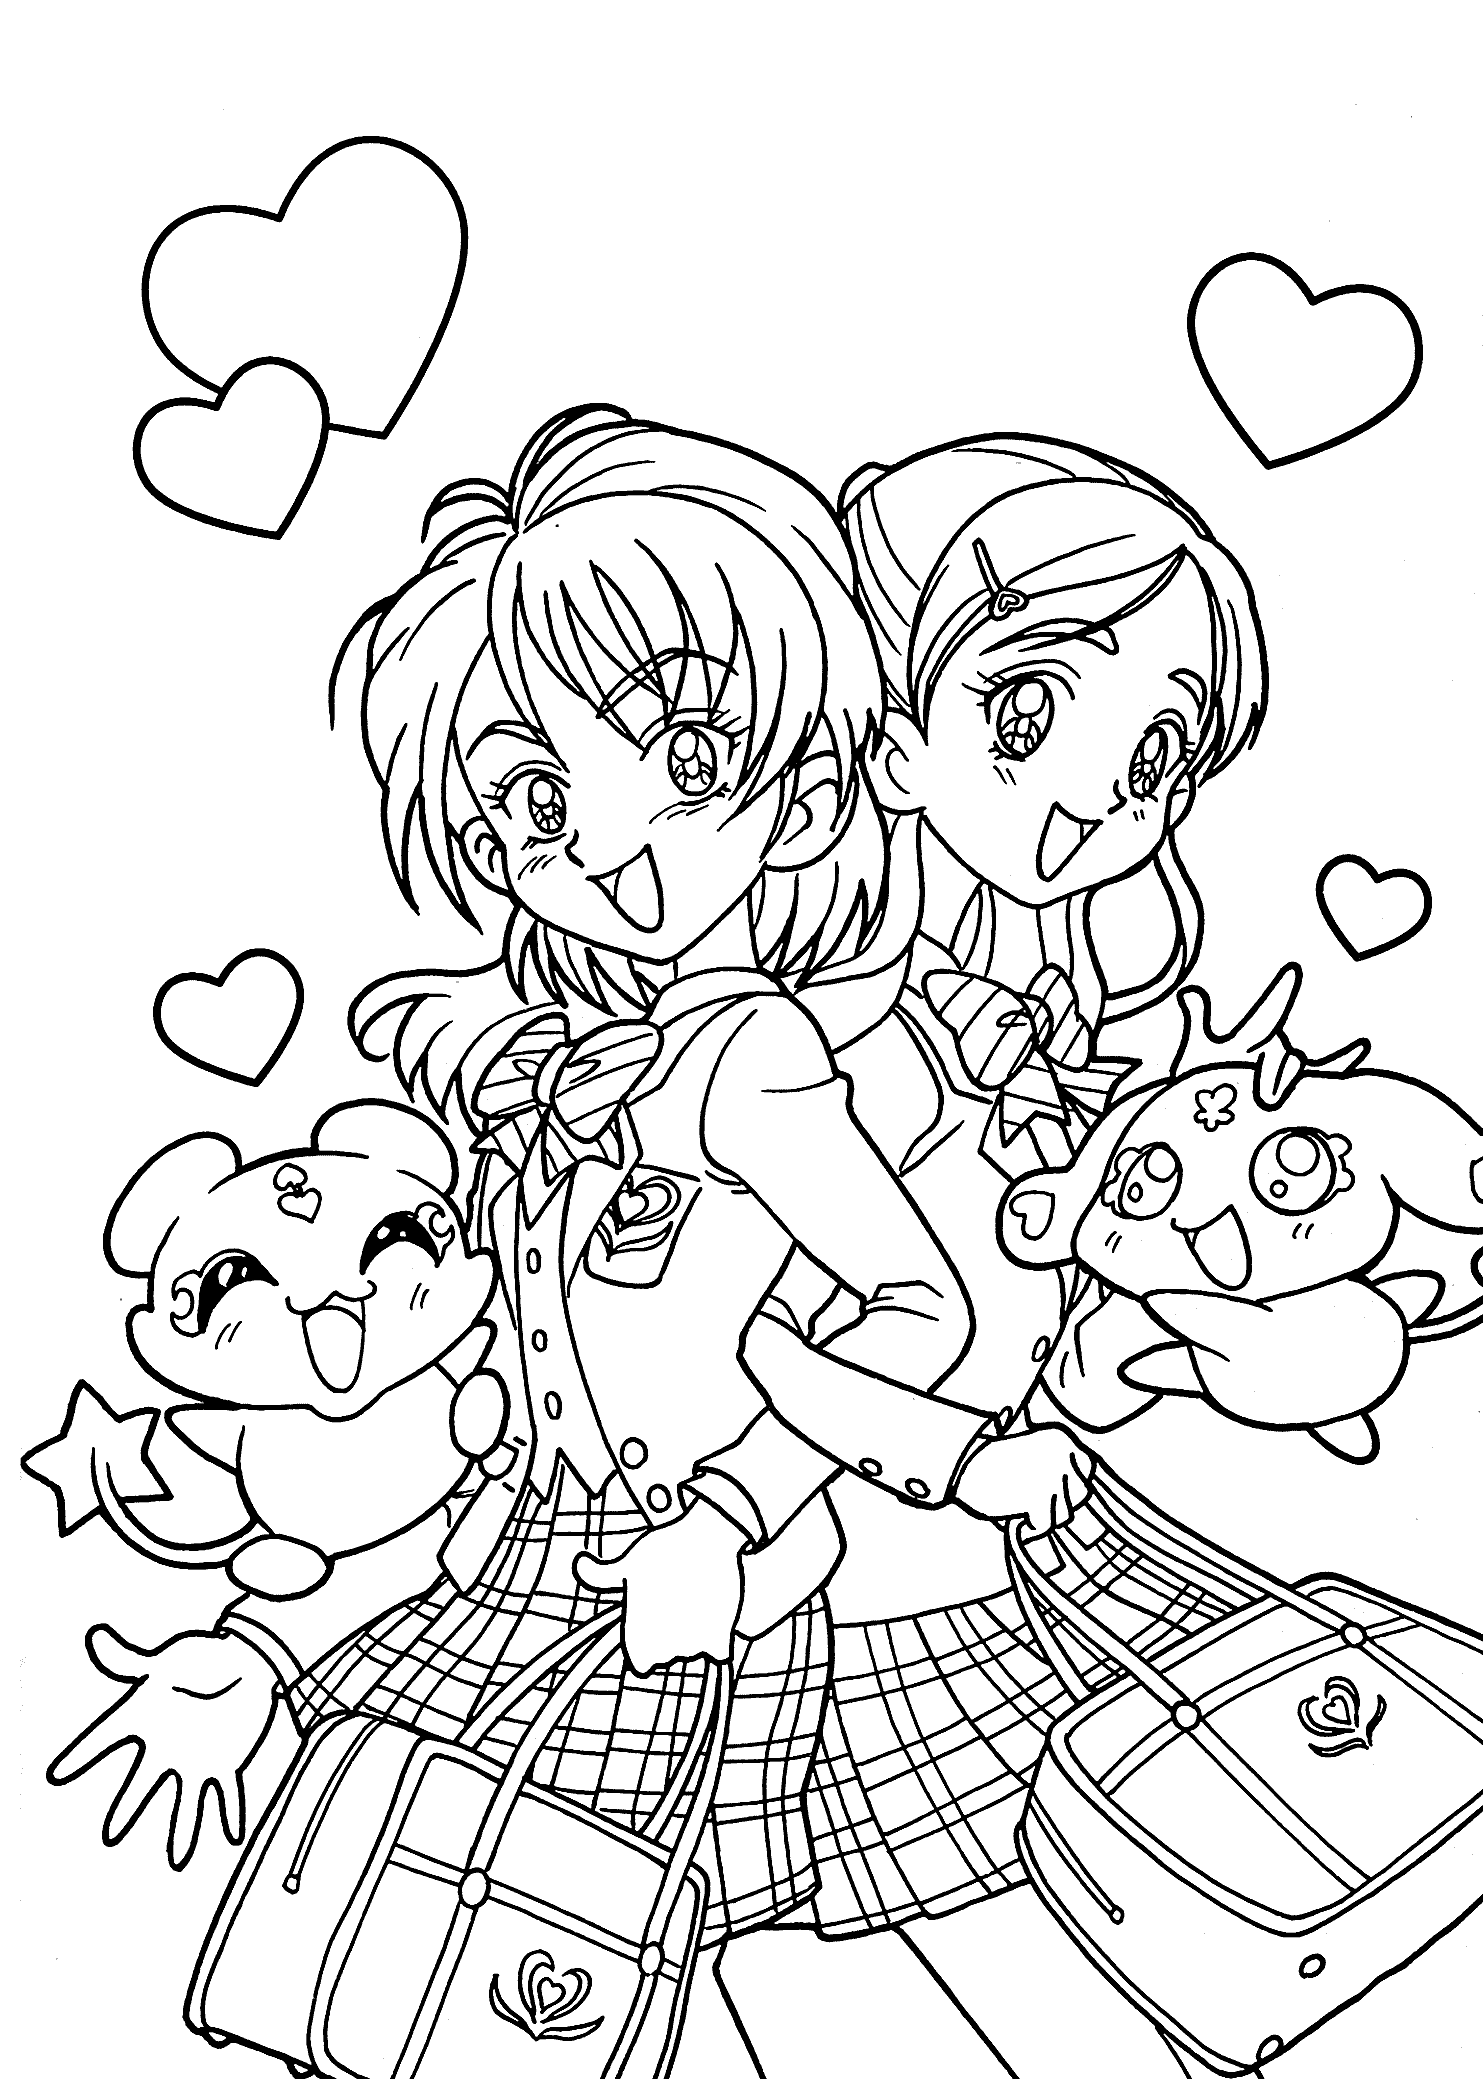 anime coloring book coloring pages anime coloring pages free and printable anime coloring book 